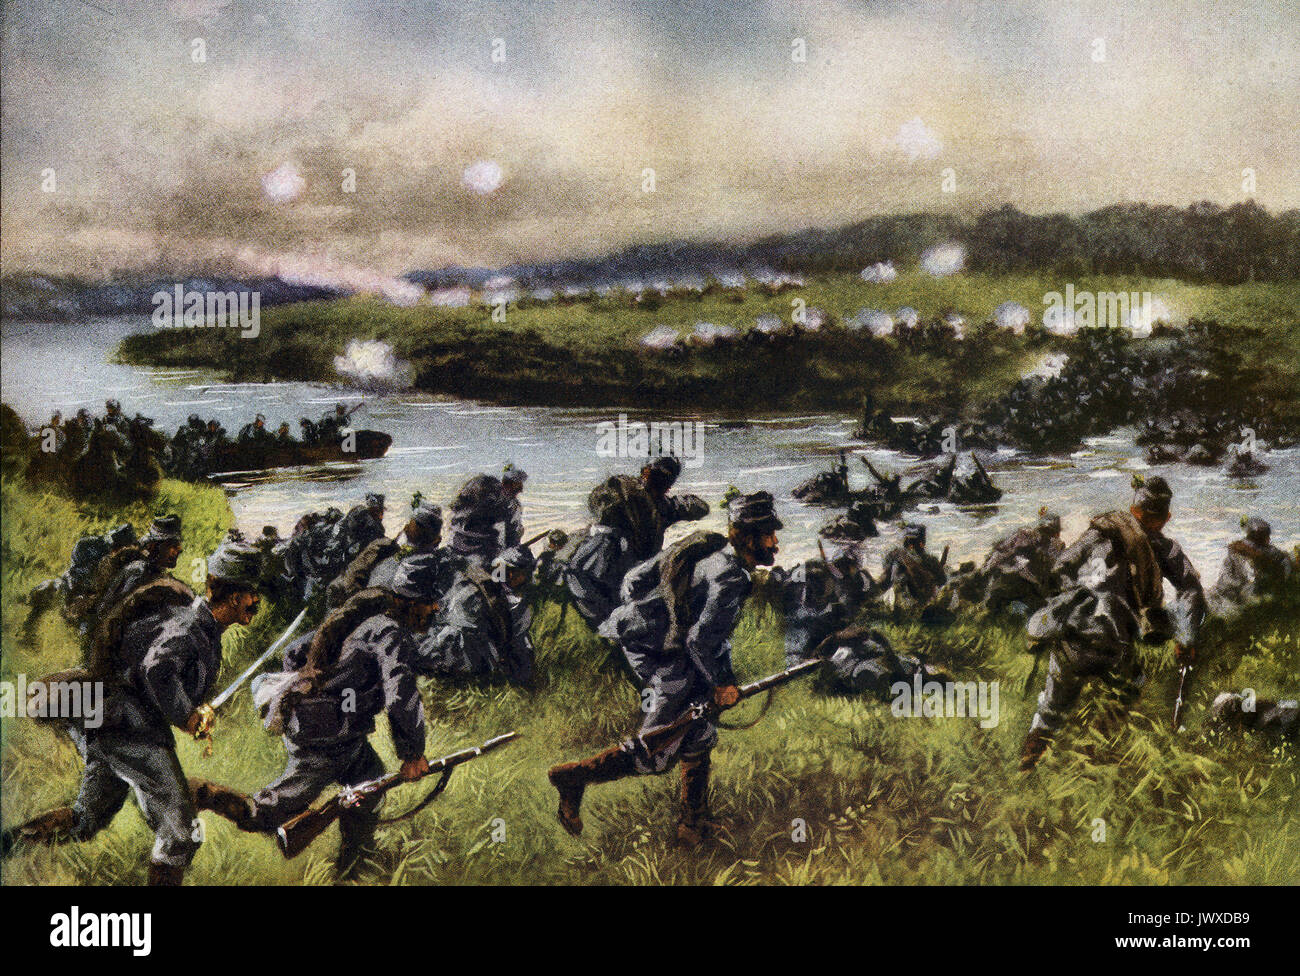 This illustration shows Austrian troops fording a river as the Russian withdraw - all in the early part of World War I. Stock Photo